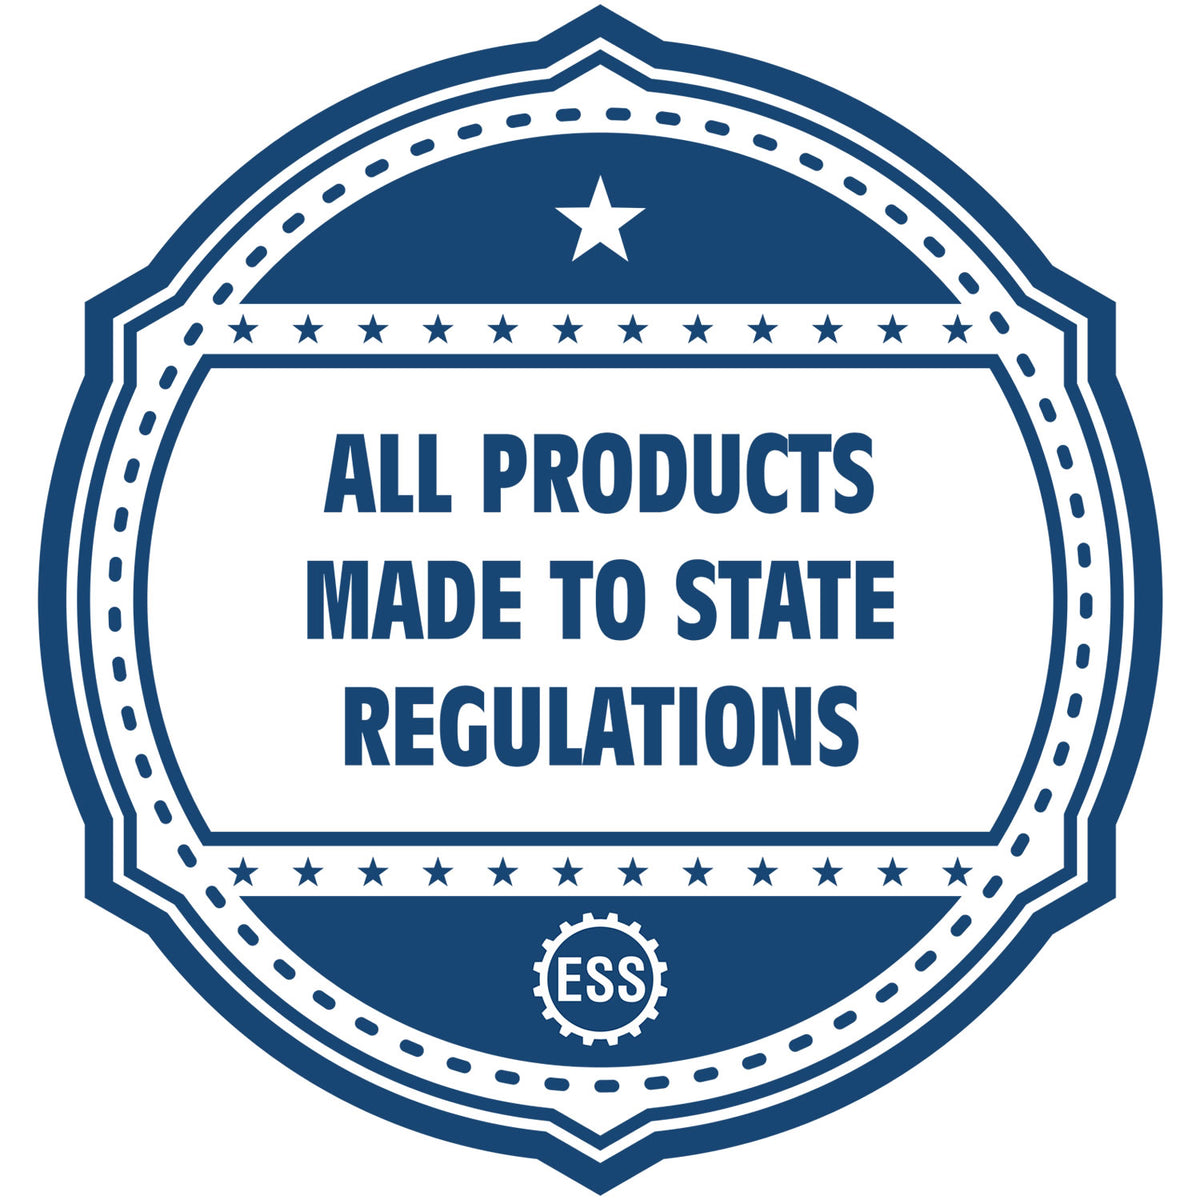 An icon or badge element for the Georgia Landscape Architectural Seal Stamp showing that this product is made in compliance with state regulations.